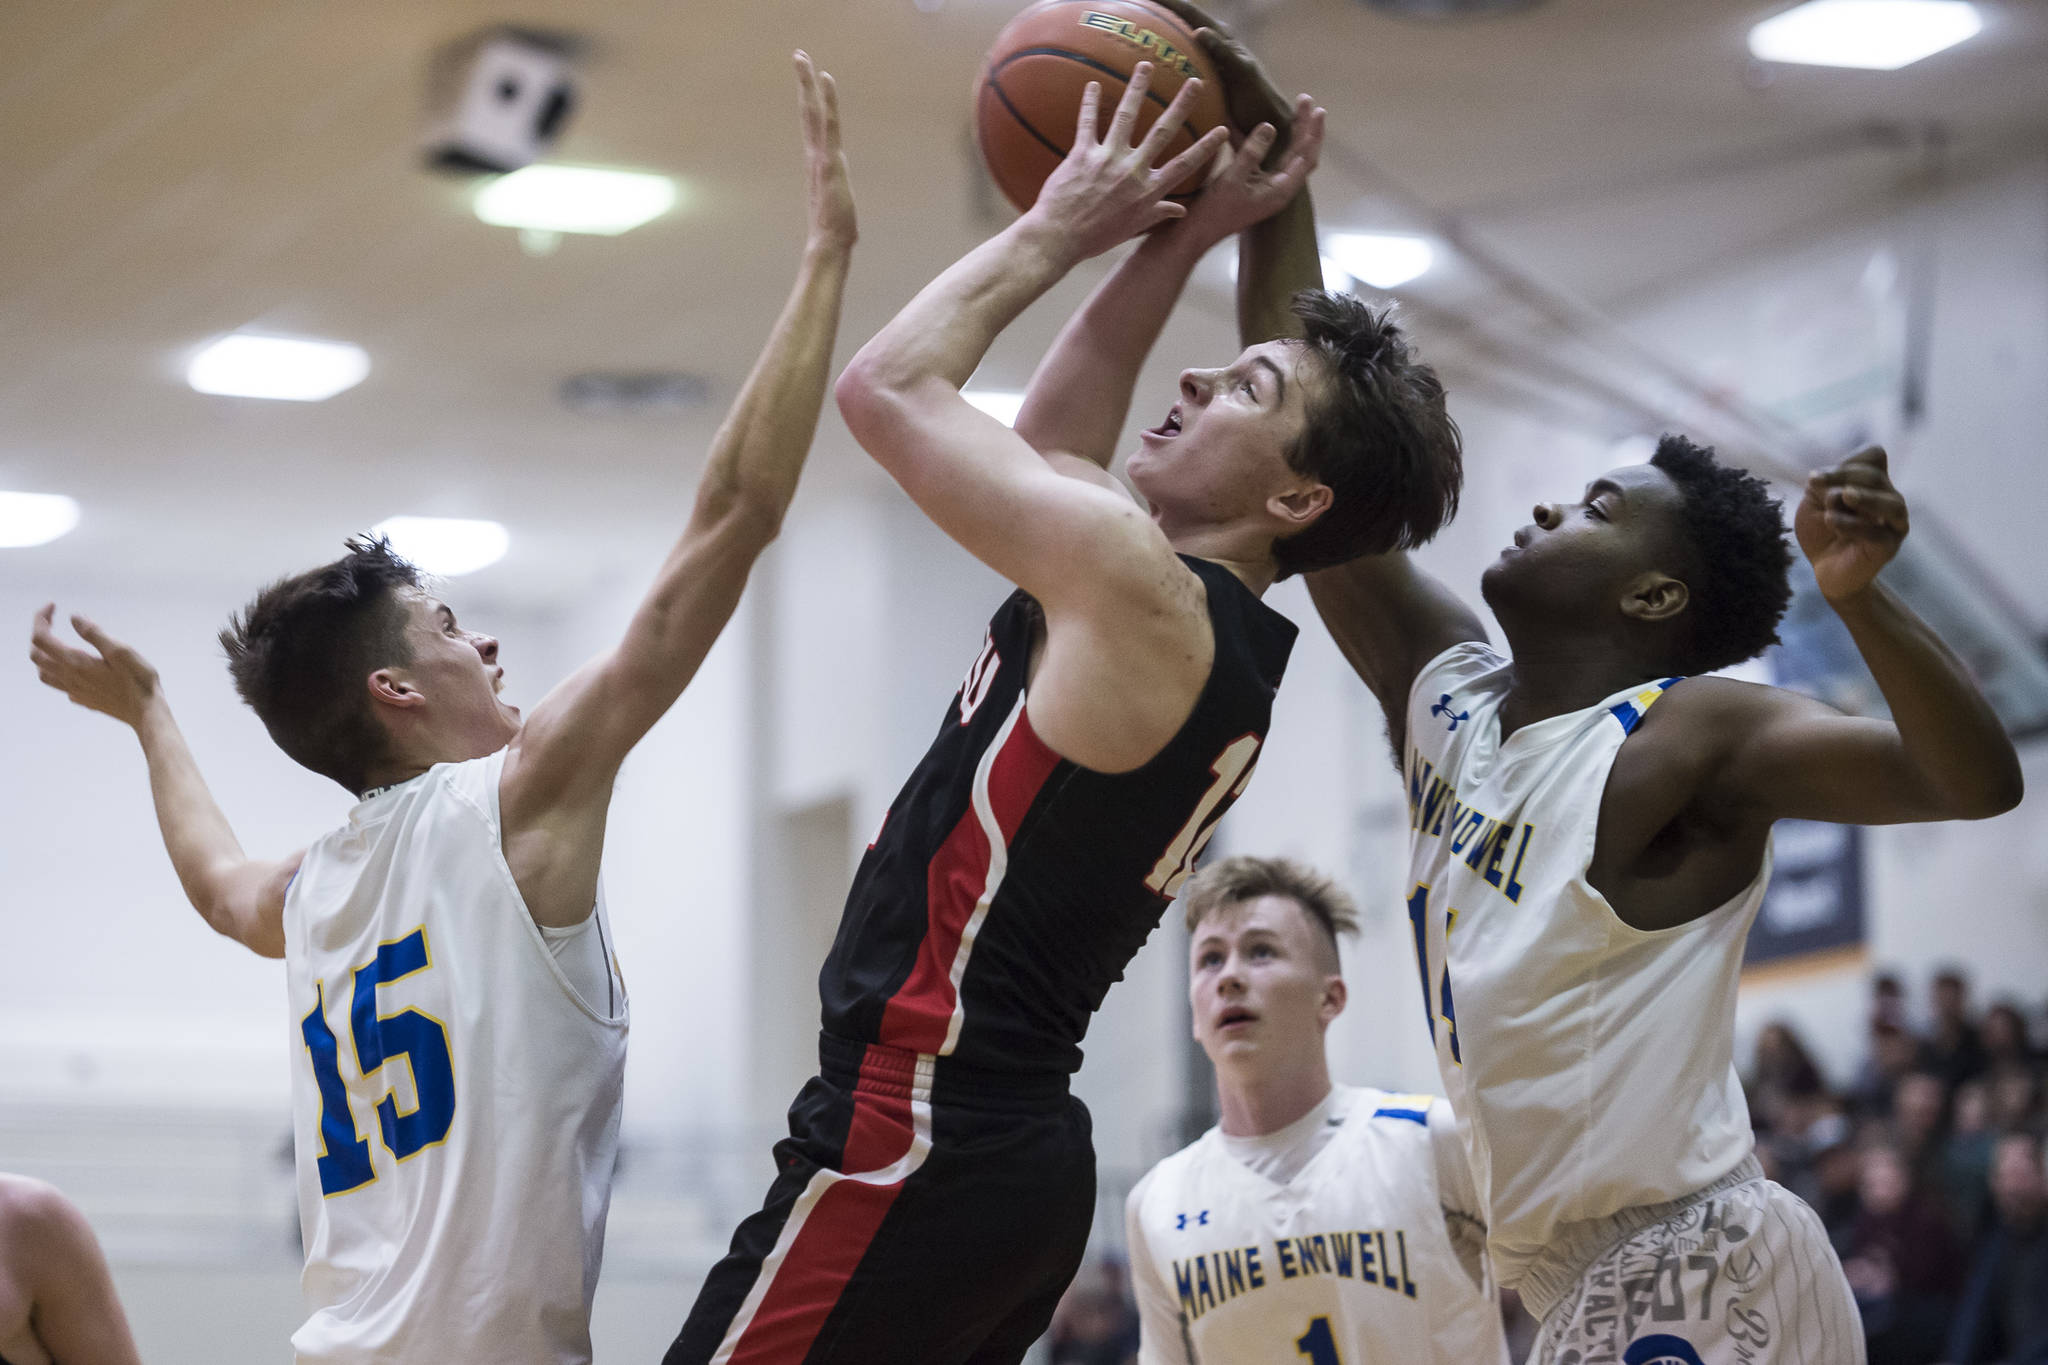 Juneau-Douglas’ Brock McCormick, center, is blocked by Maine-Endwell’s Jordan Gallagher, left, and Kameron Griggs at the Princess Cruises Capital City Classic at Juneau-Douglas High School on Saturday, Dec. 29, 2018. Juneau-Douglas won 66-61. (Michael Penn | Juneau Empire)